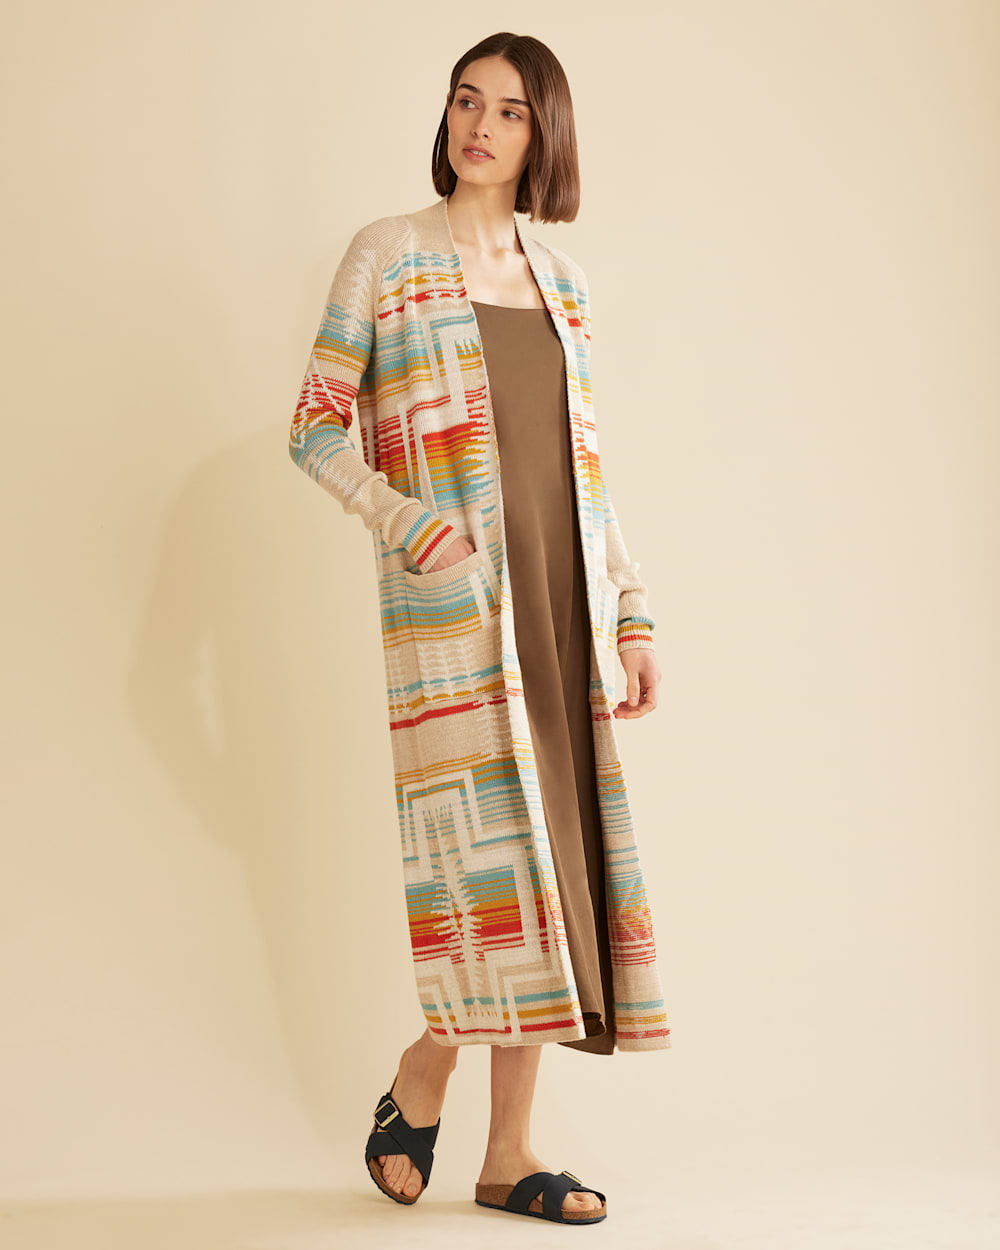 ALTERNATE VIEW OF WOMEN'S HARDING PACIFIC DUSTER SWEATER IN NATURAL LINEN MULTI image number 5